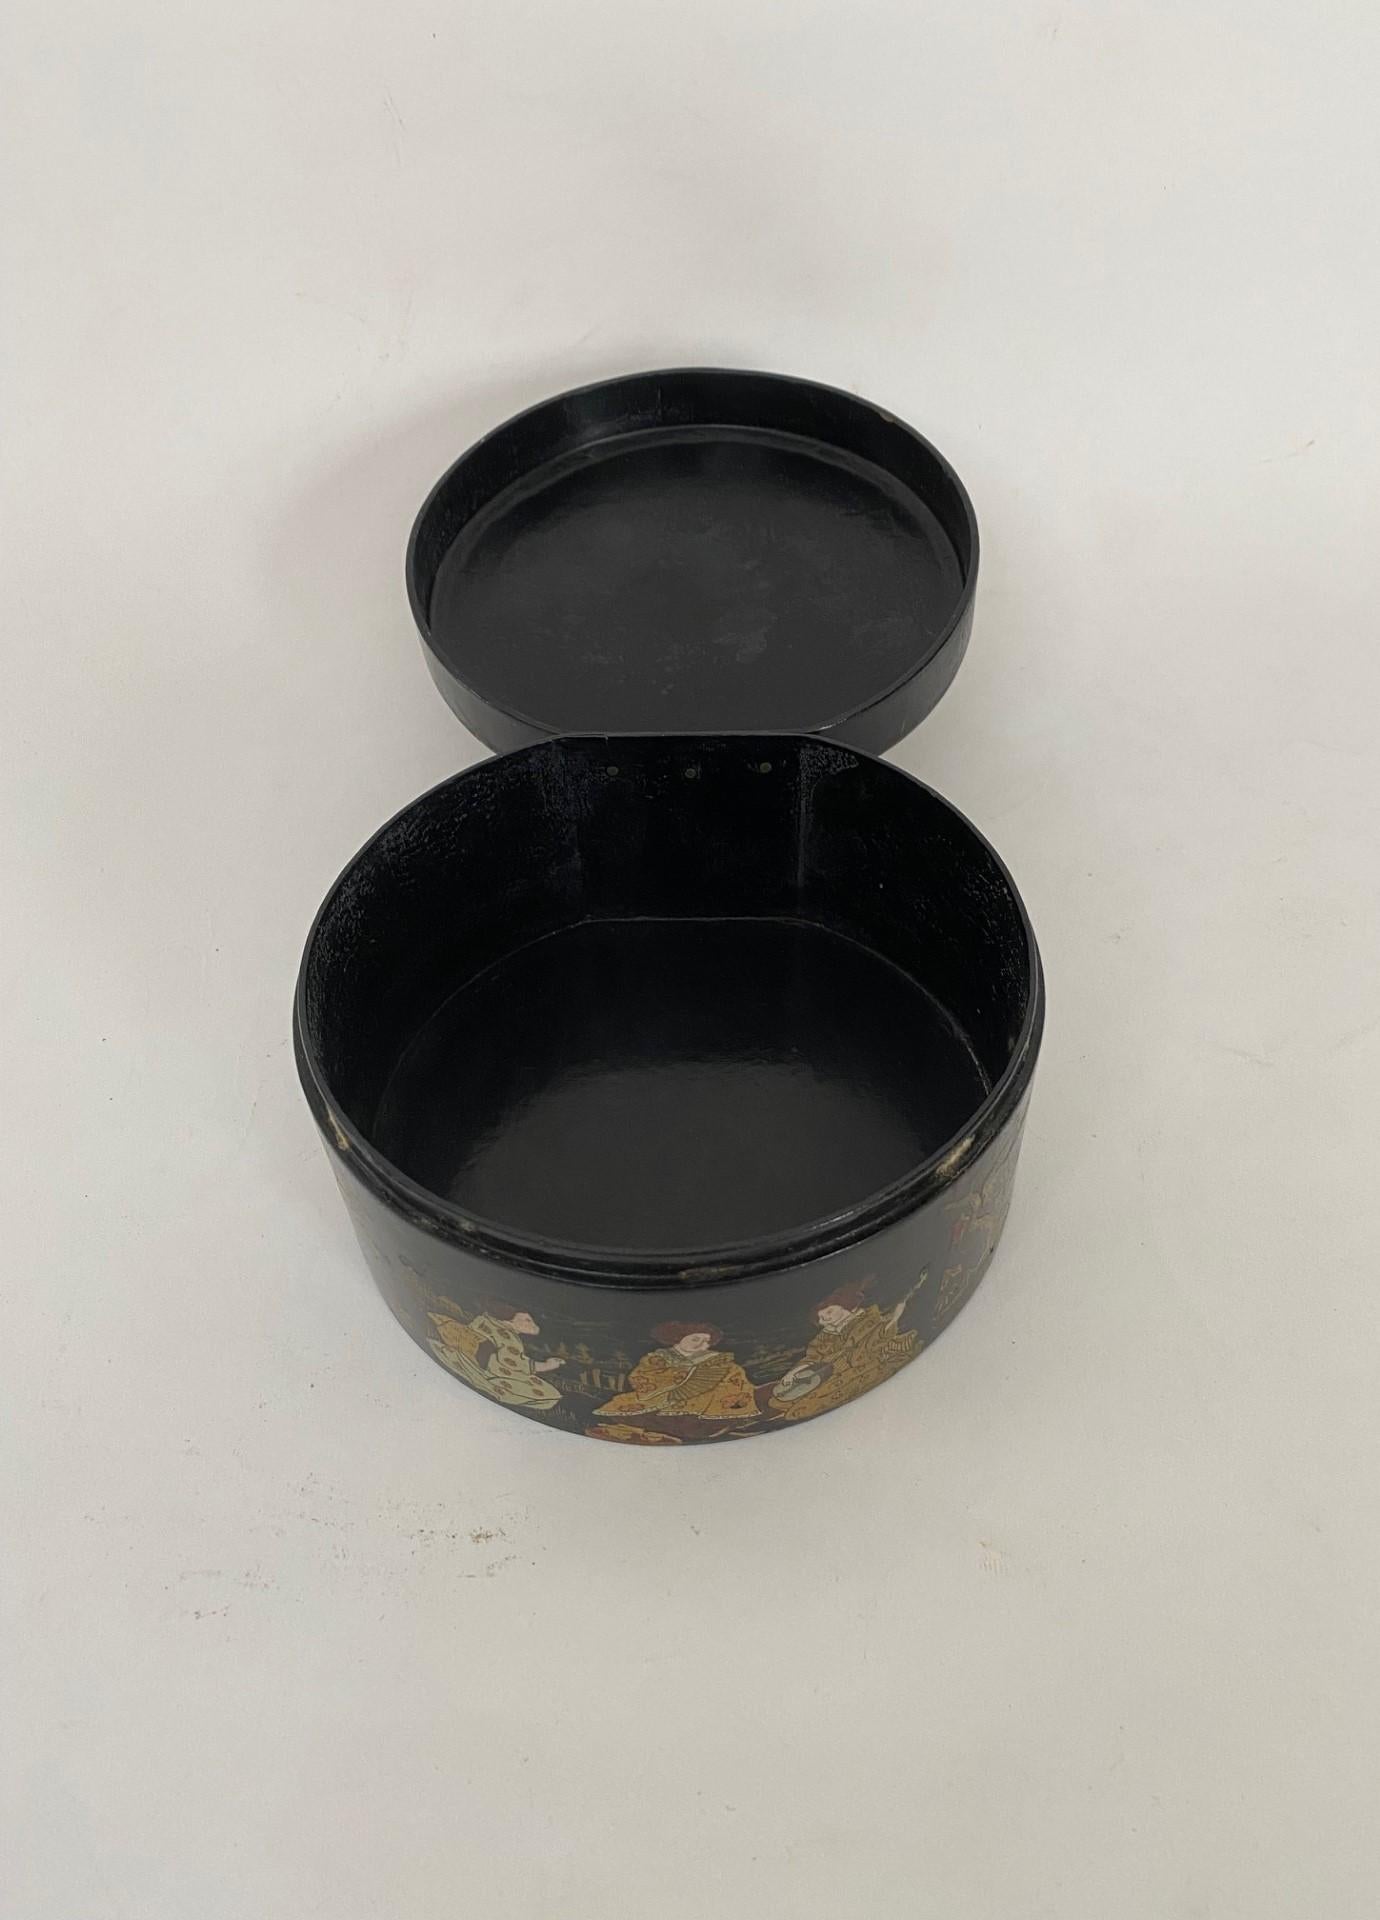 Hand-Painted Old Japanese Black Lacquered Decorative Round Papier Mache Box with Hinged Top For Sale